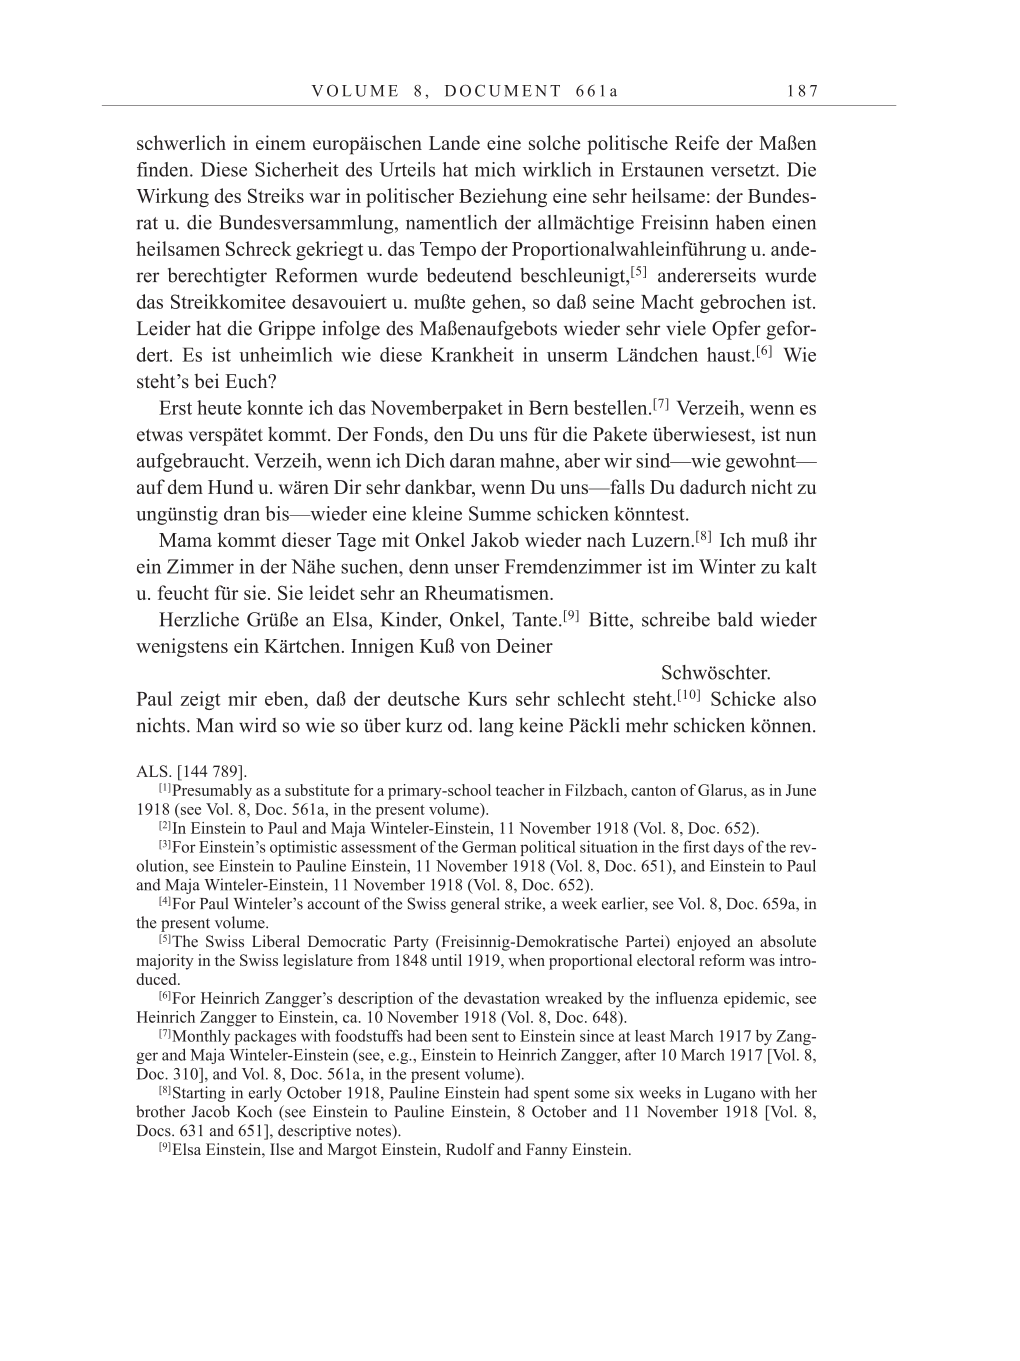 Volume 10: The Berlin Years: Correspondence May-December 1920 / Supplementary Correspondence 1909-1920 page 187